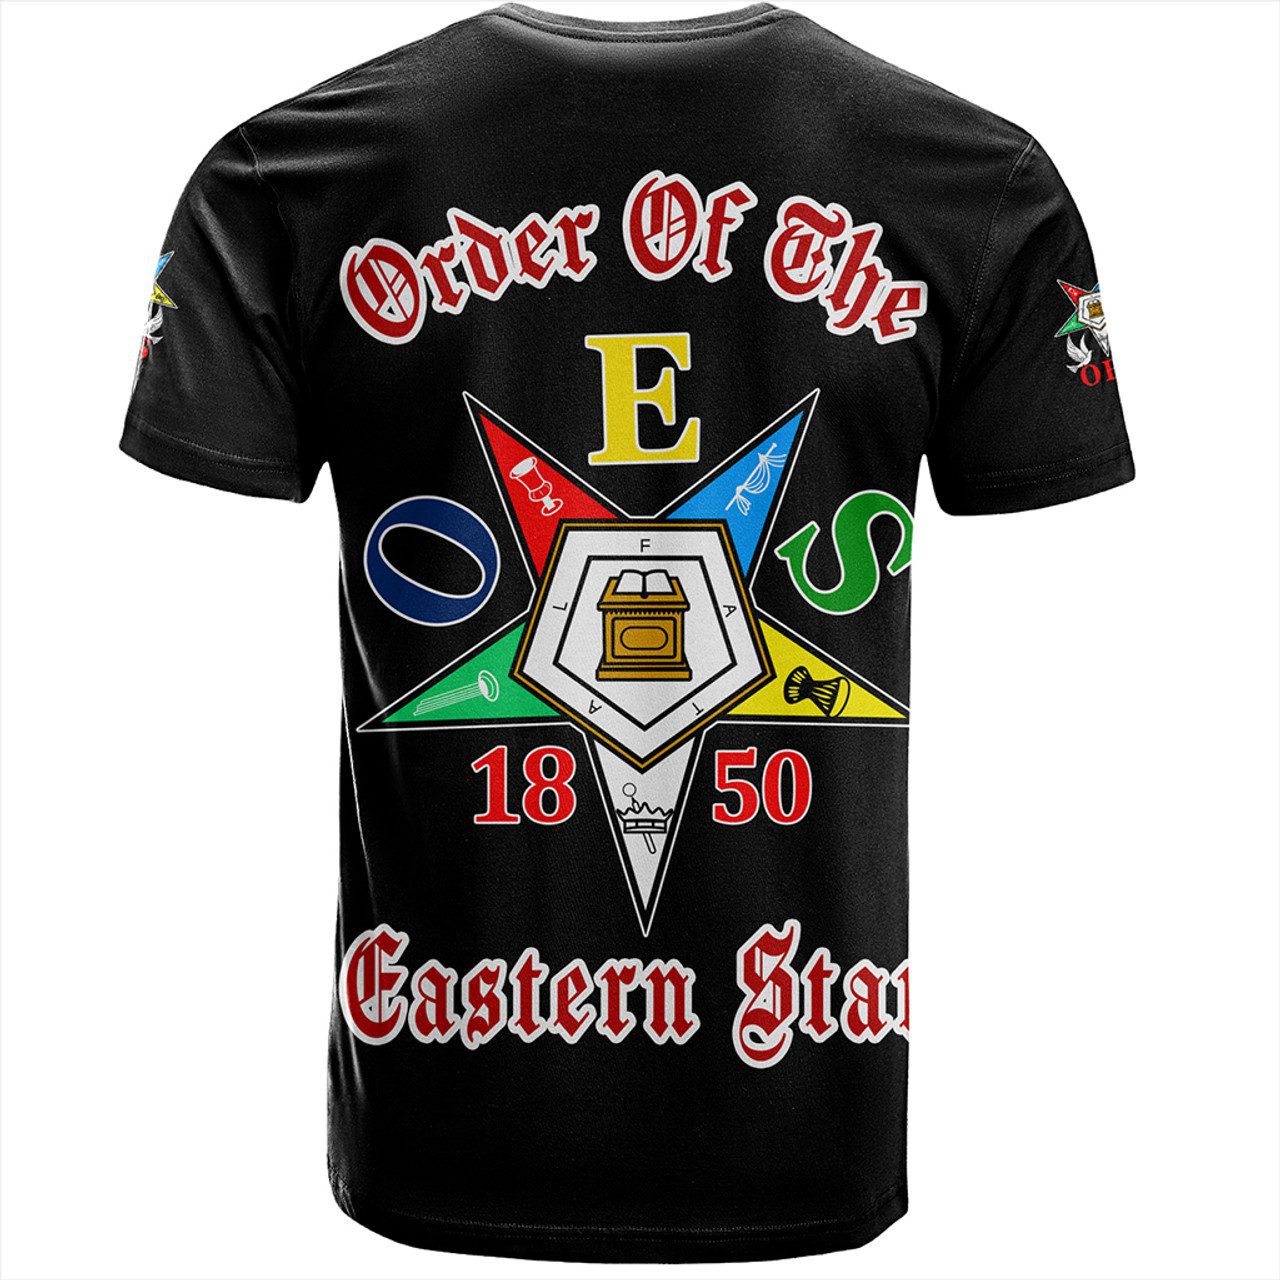 Order of the Eastern Star T-Shirt Pearls Black